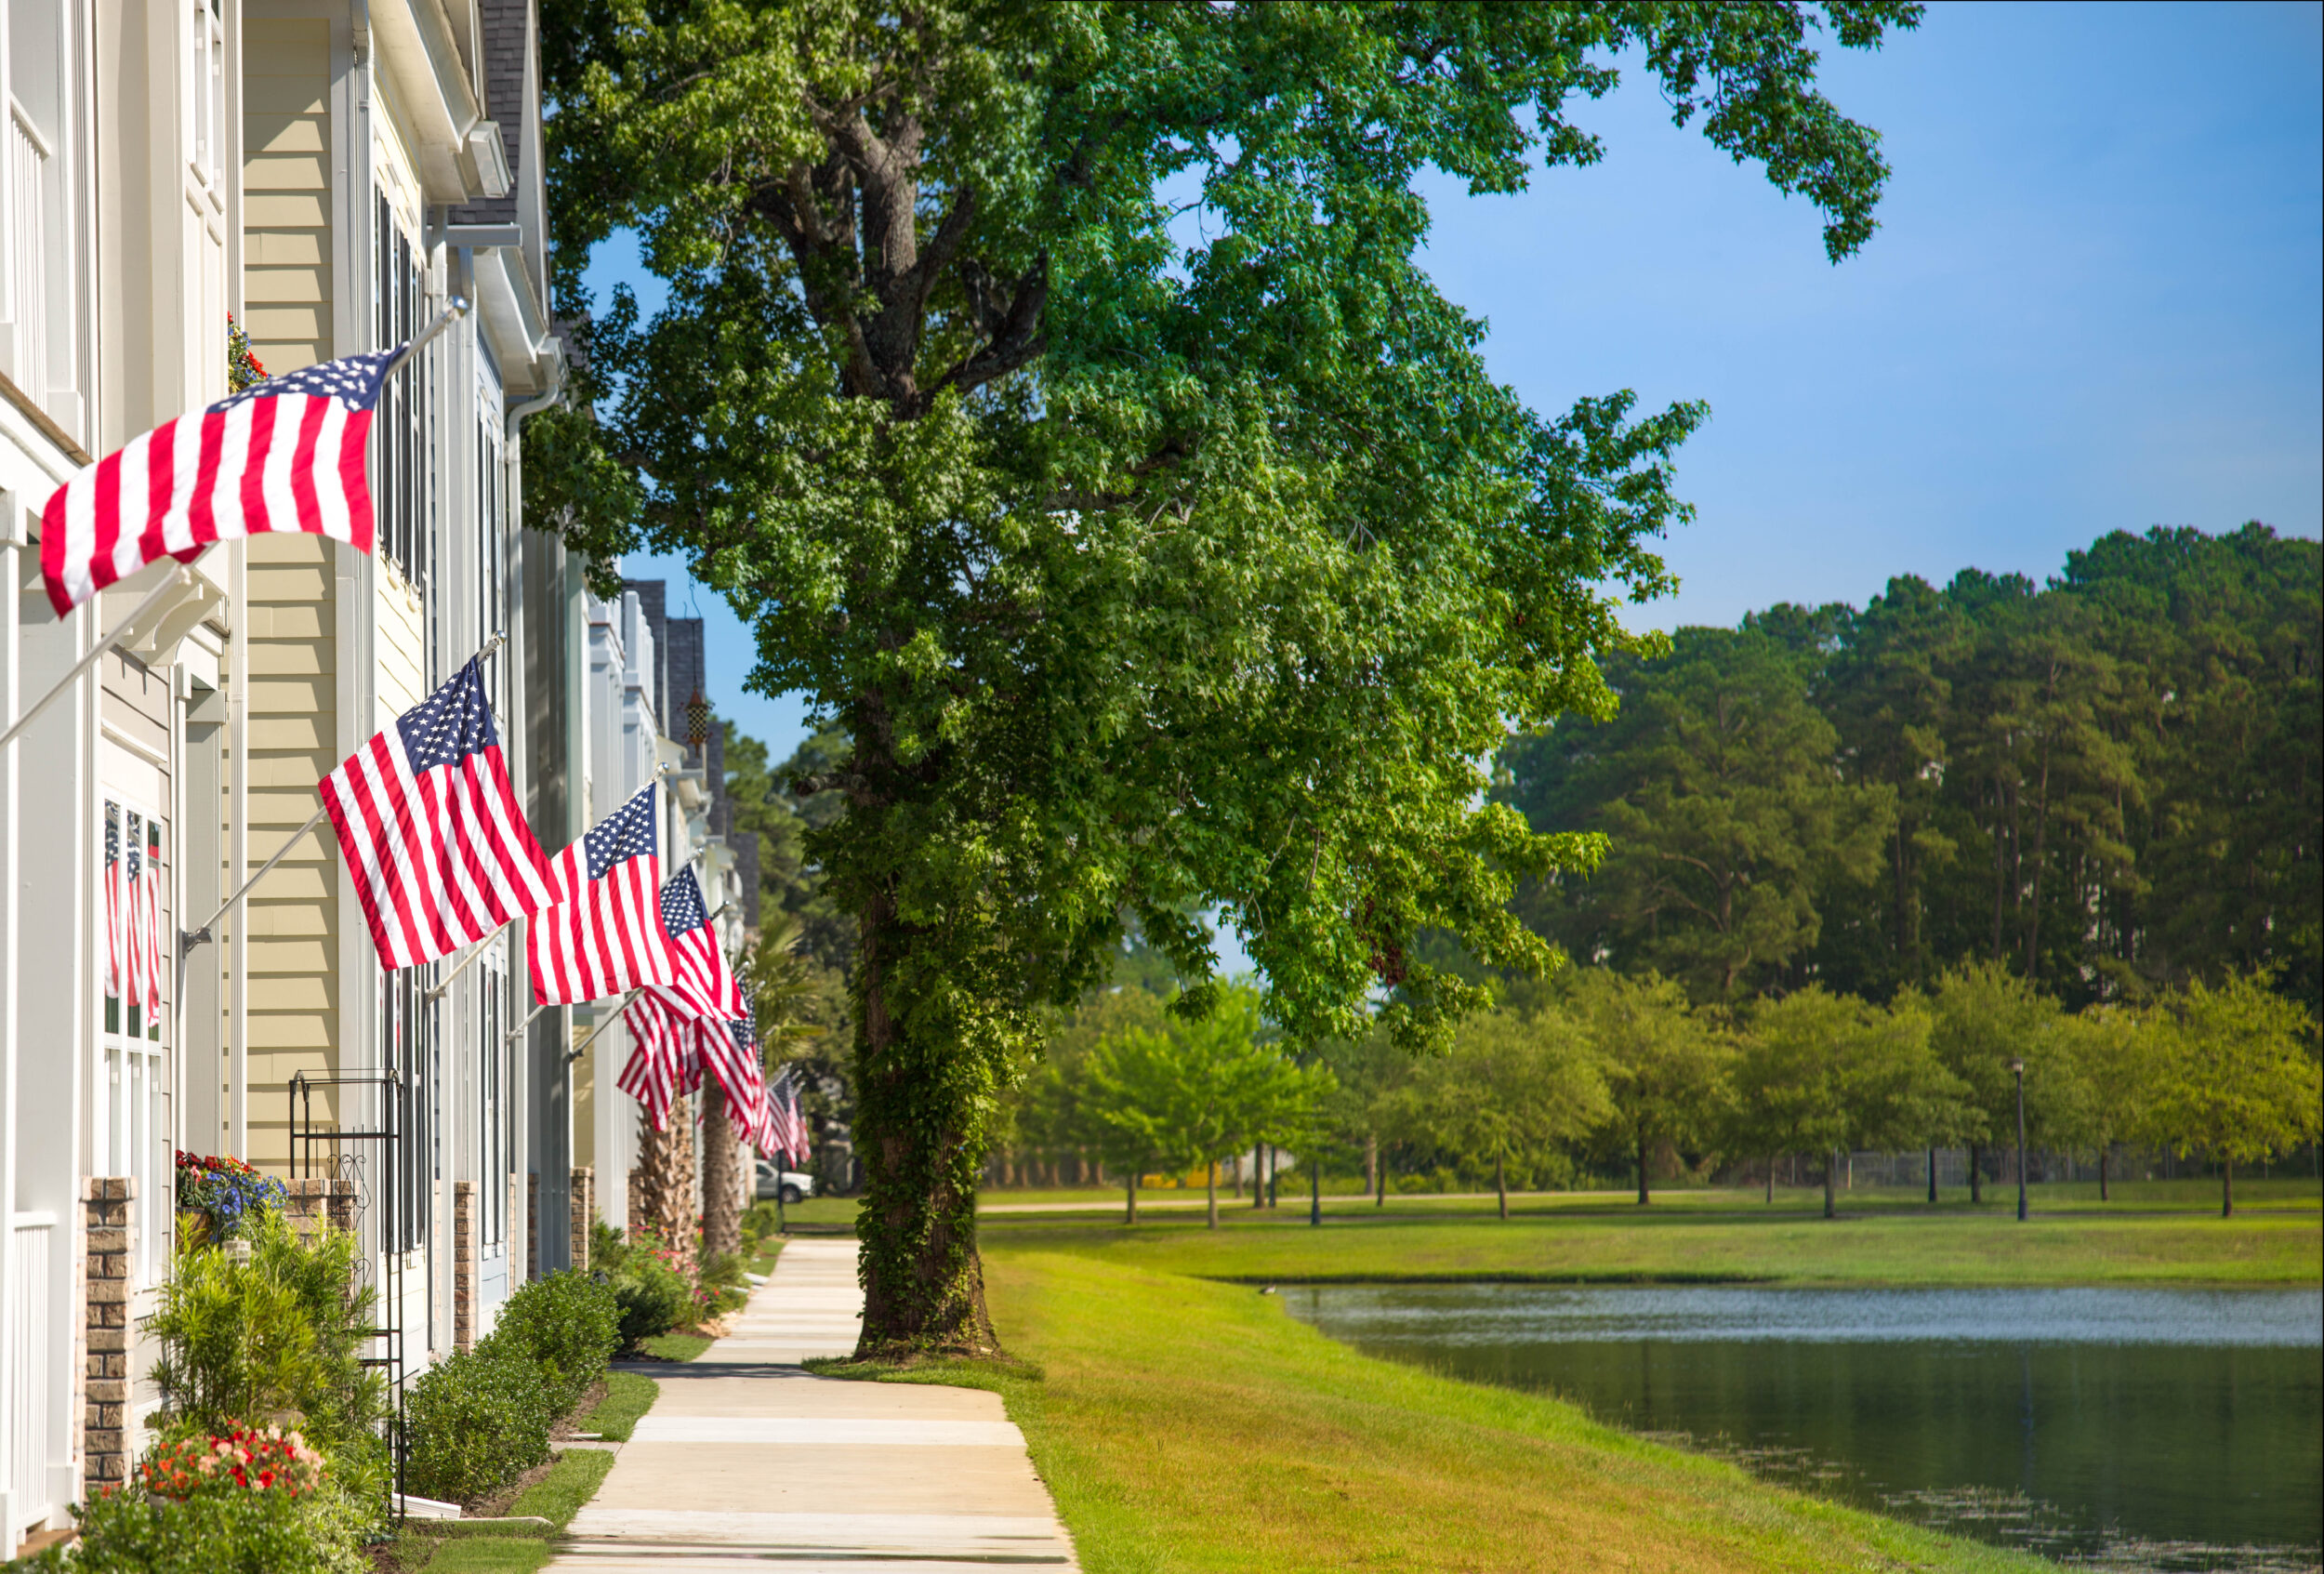 A view of townhomes in Market Common with the American Flags proudly waving.